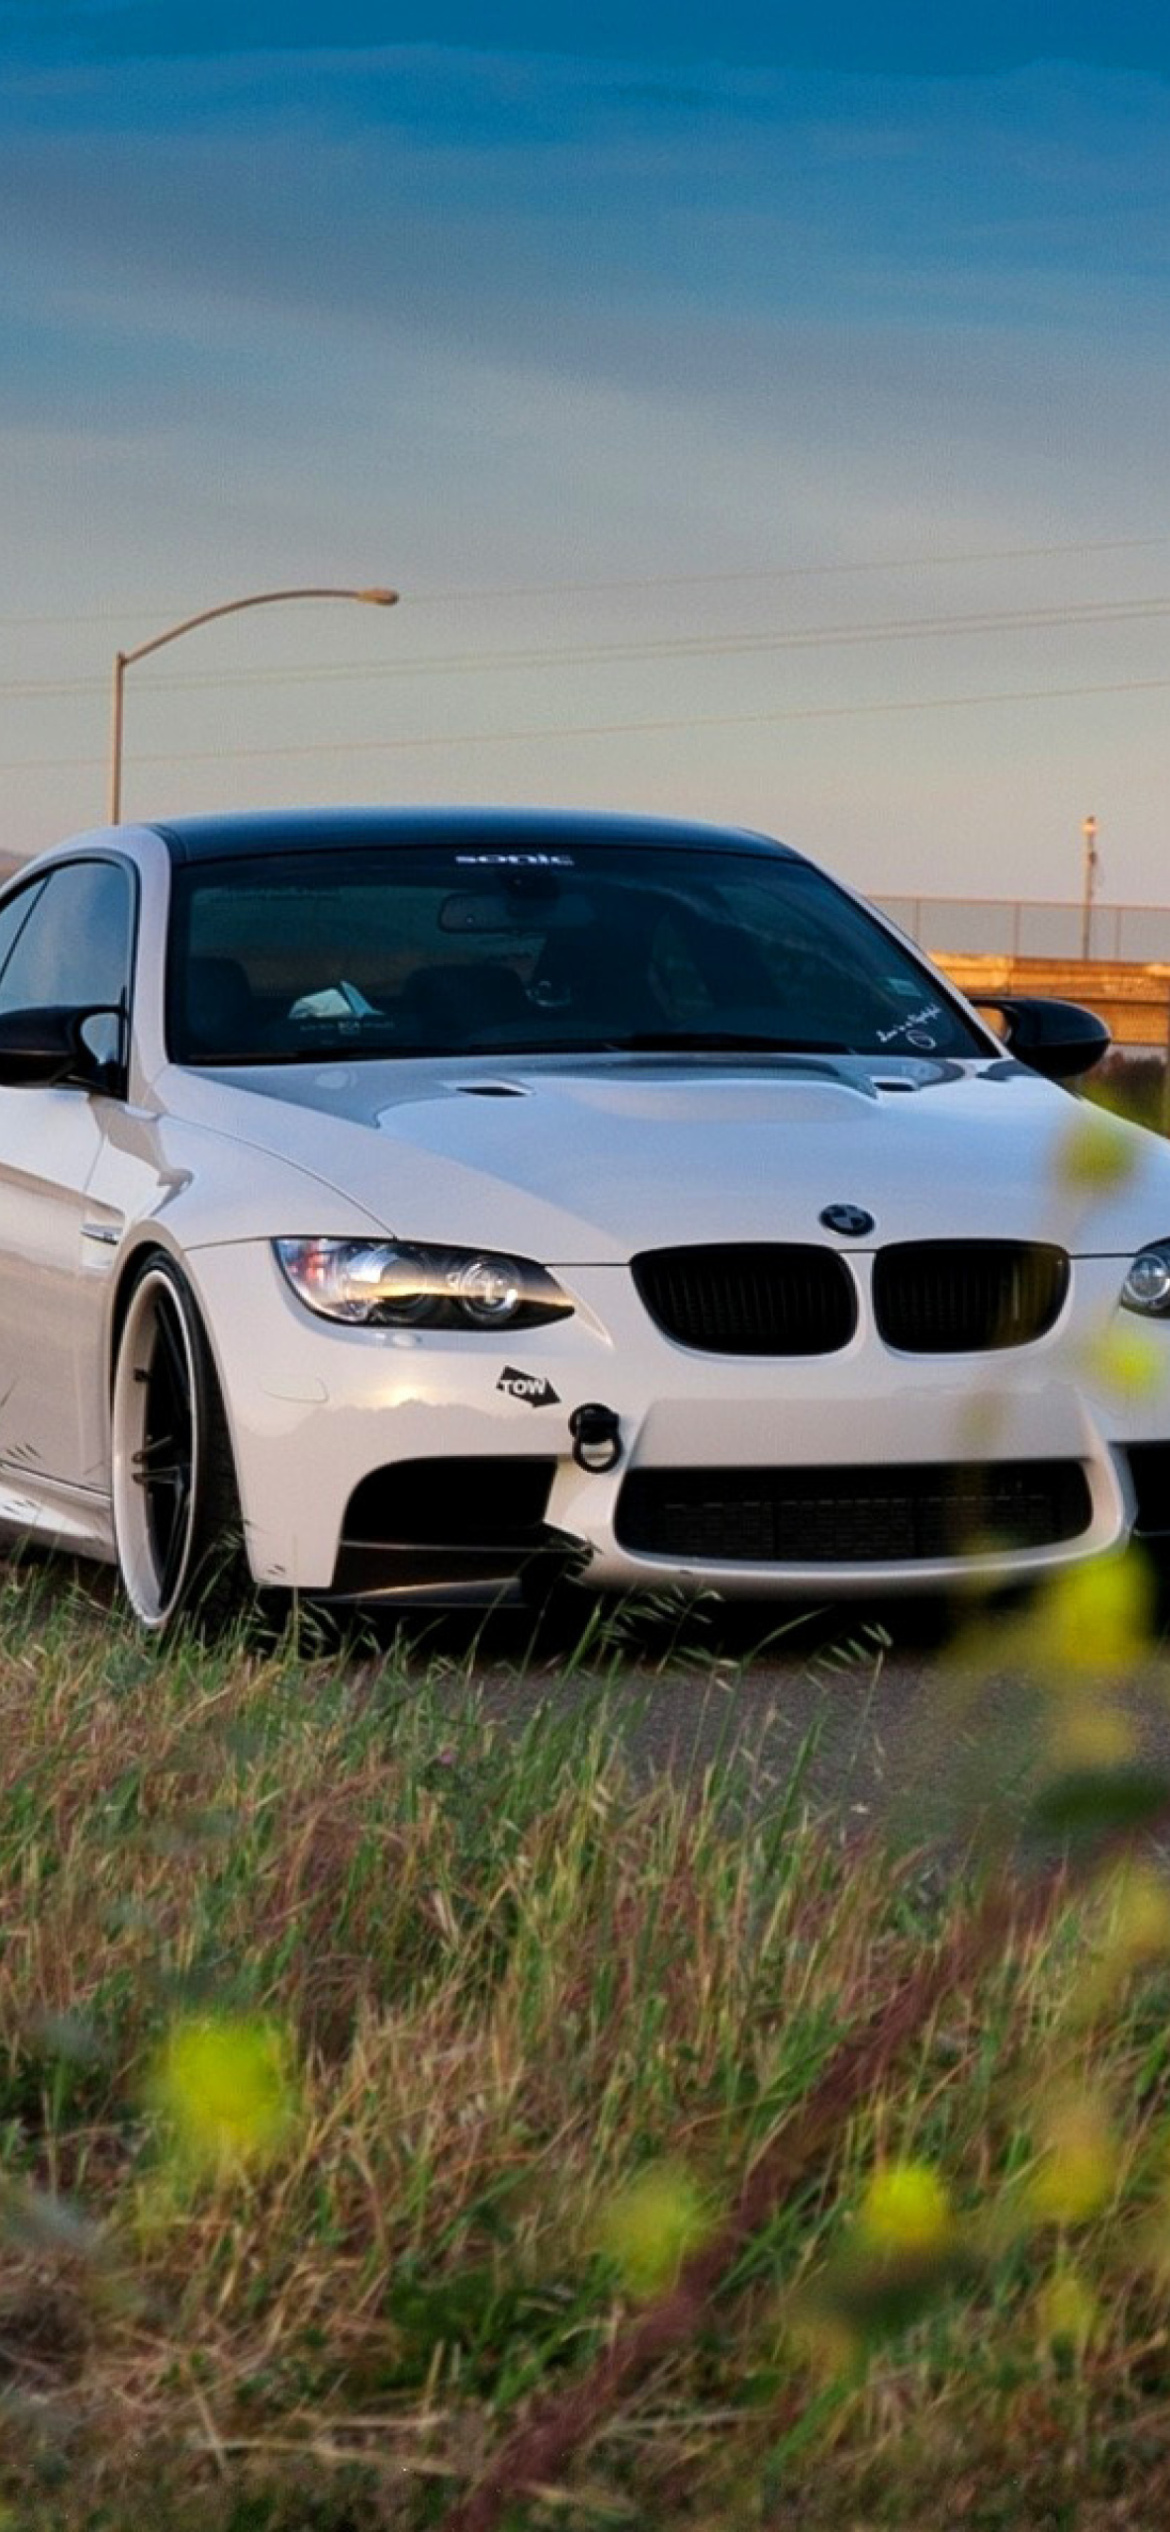 BMW M3 with Wheels 19 wallpaper 1170x2532